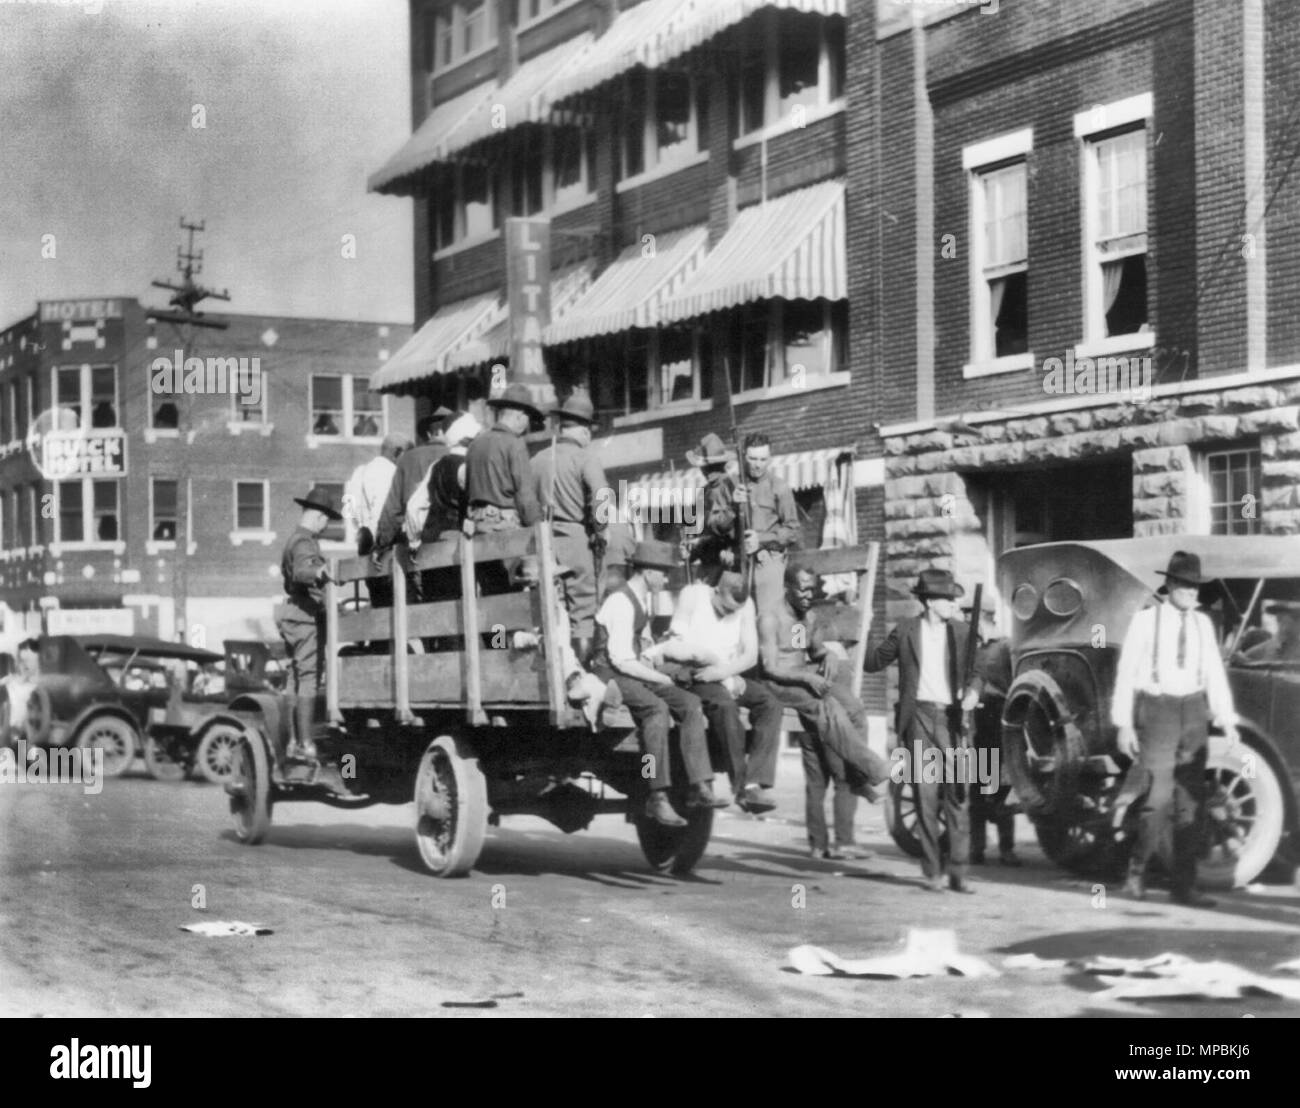 Truck on street near Litan Hotel carrying soldiers and African ...